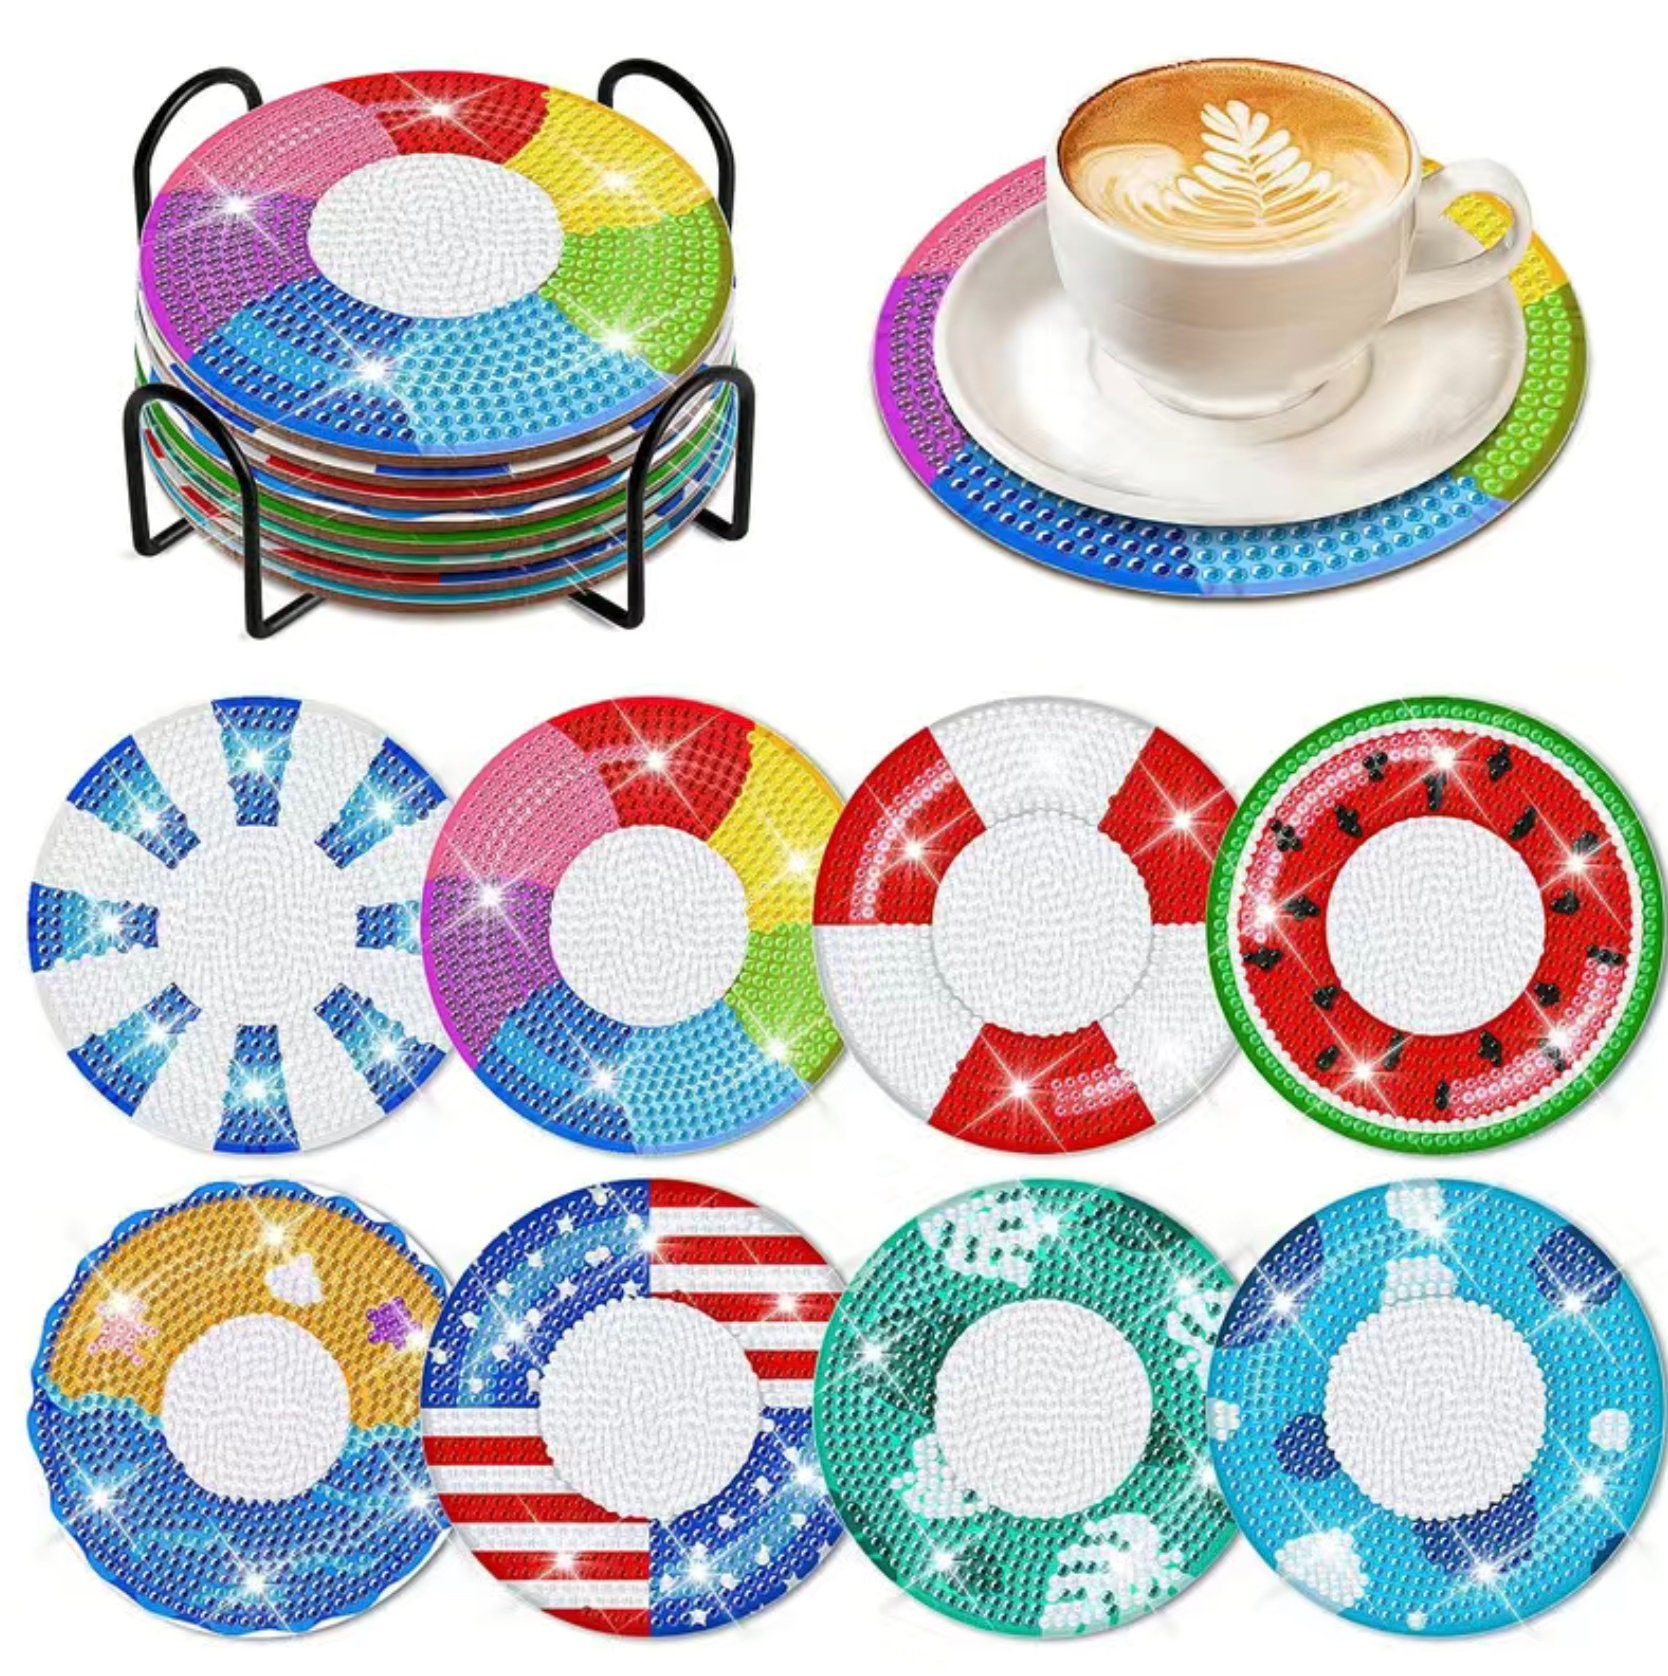 DIY 6 Beach Fun Coasters With Scuba Gear, Kayak and Flip Flops, 5D Diamond  Painting Kit, Tools and Rhinestones Included 